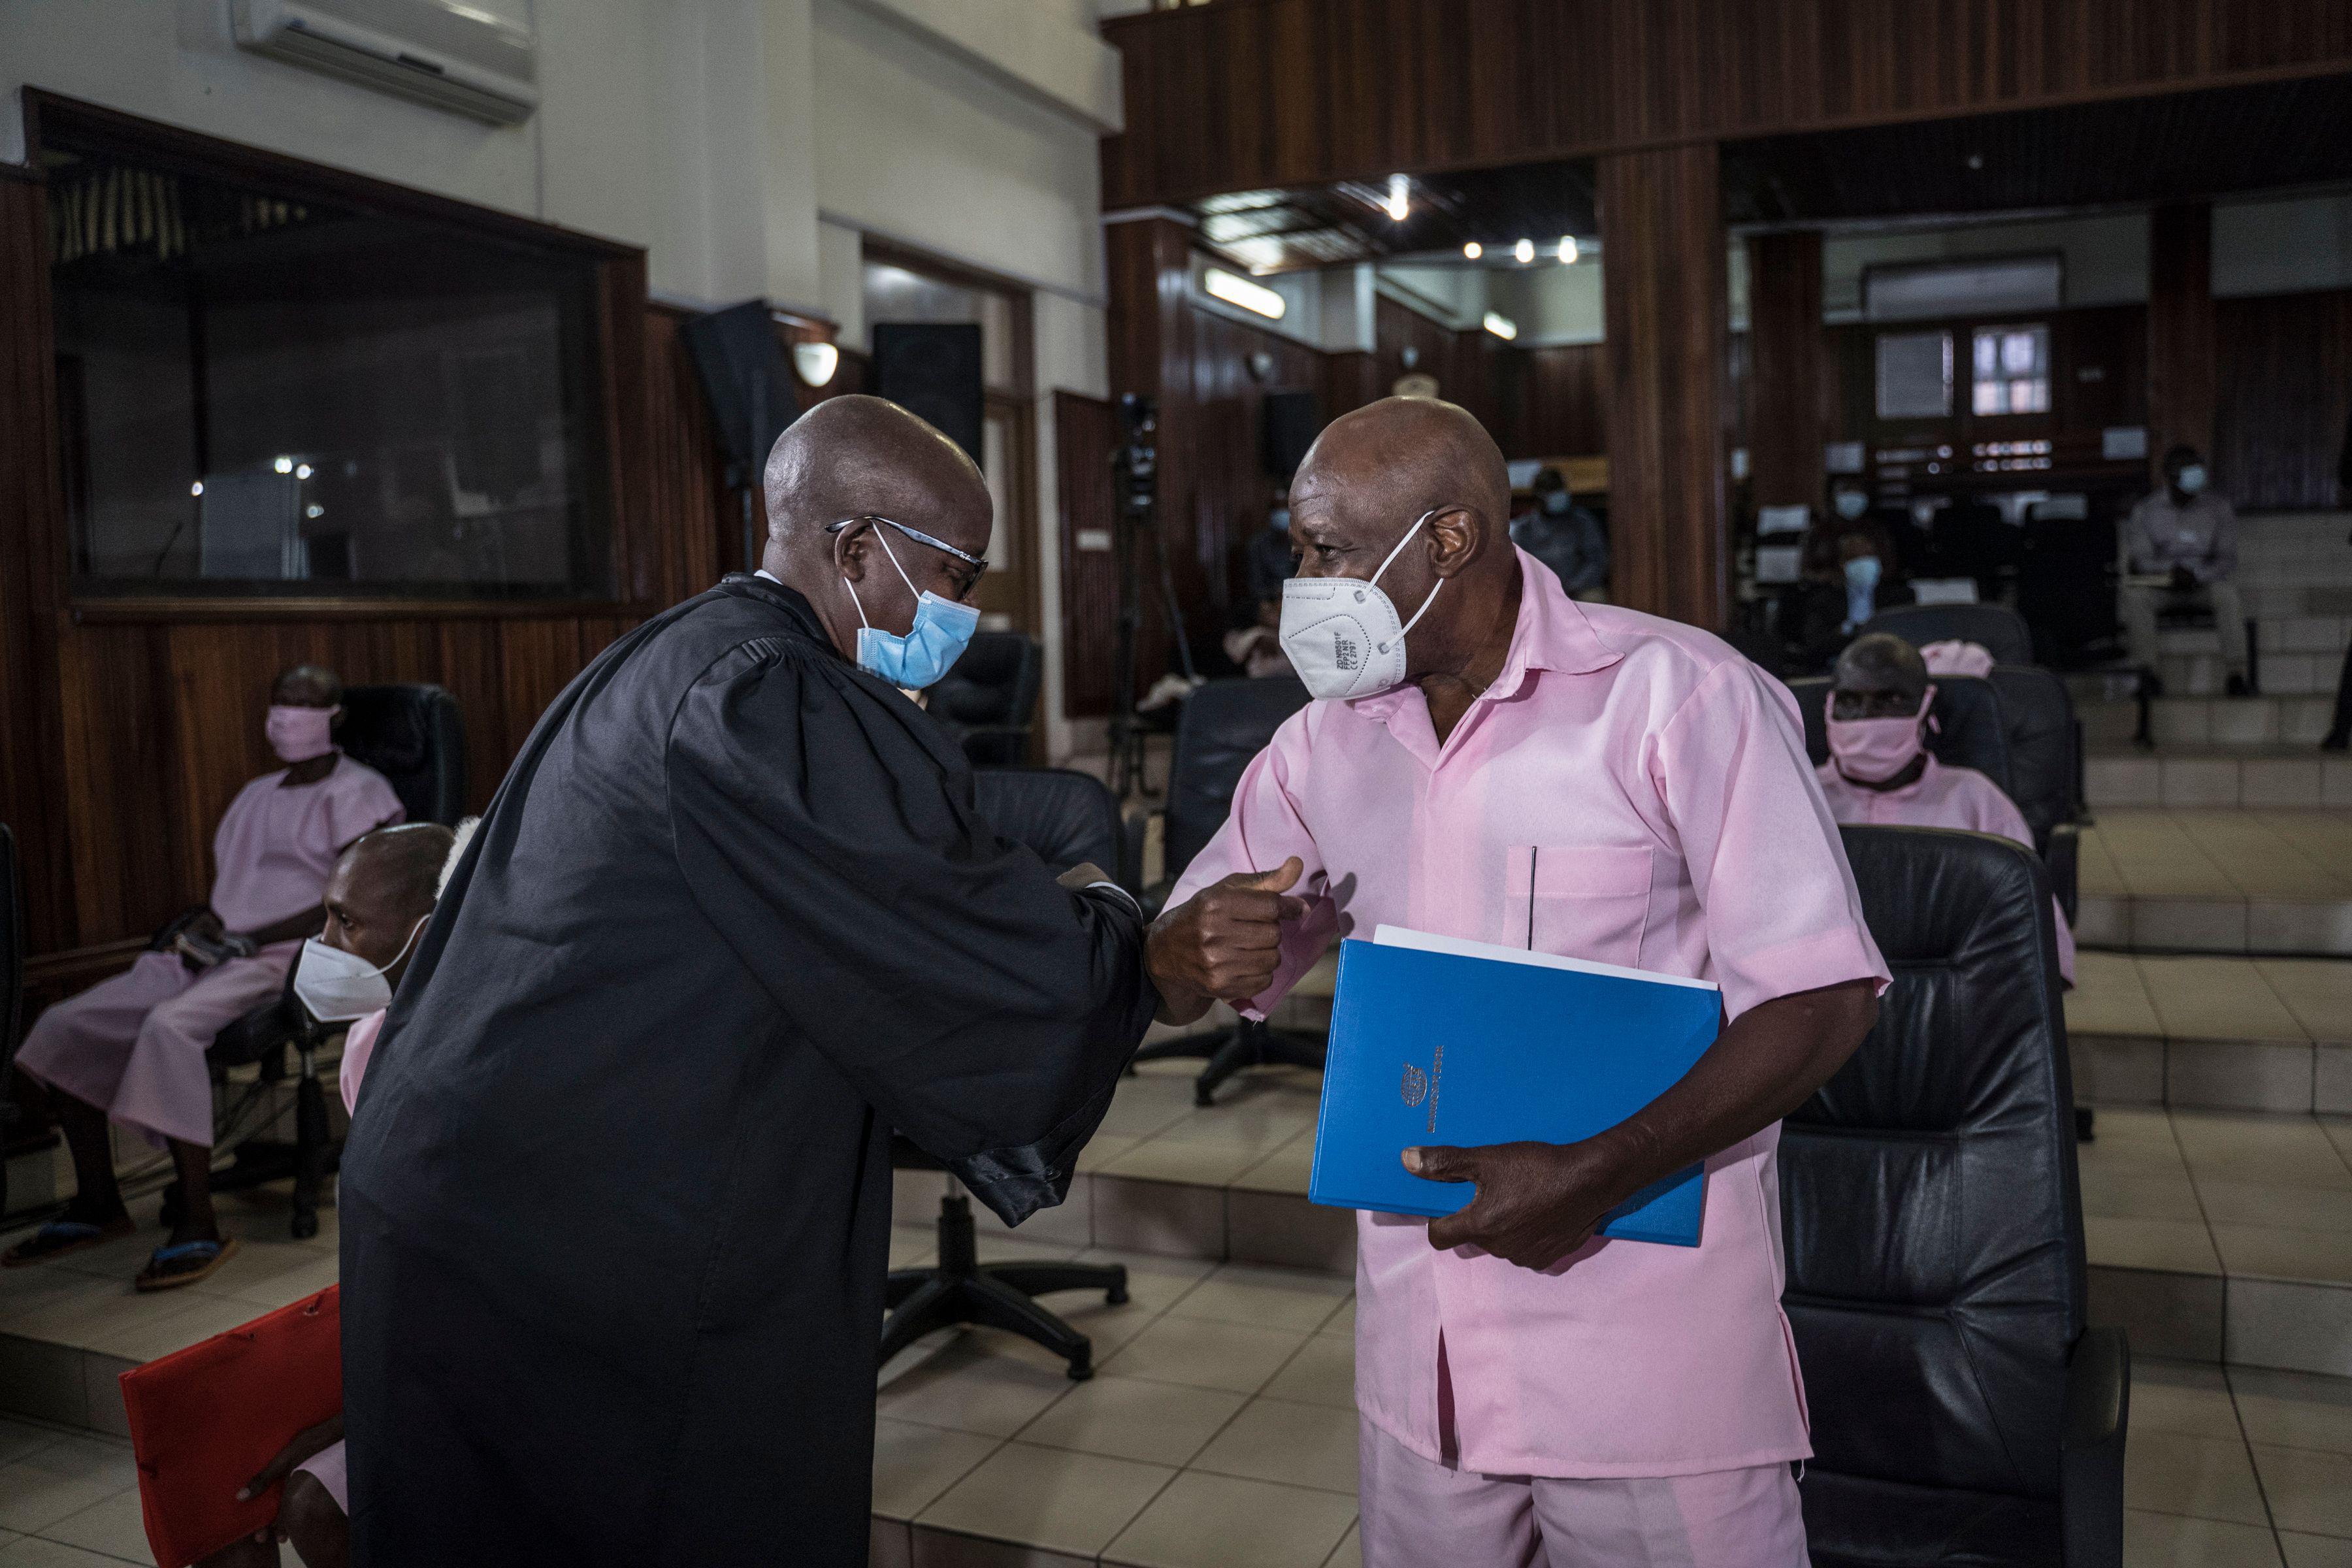 A man in black robes and a mask elbow-bumps with a man in pink clothes and a mask in a courtroom.